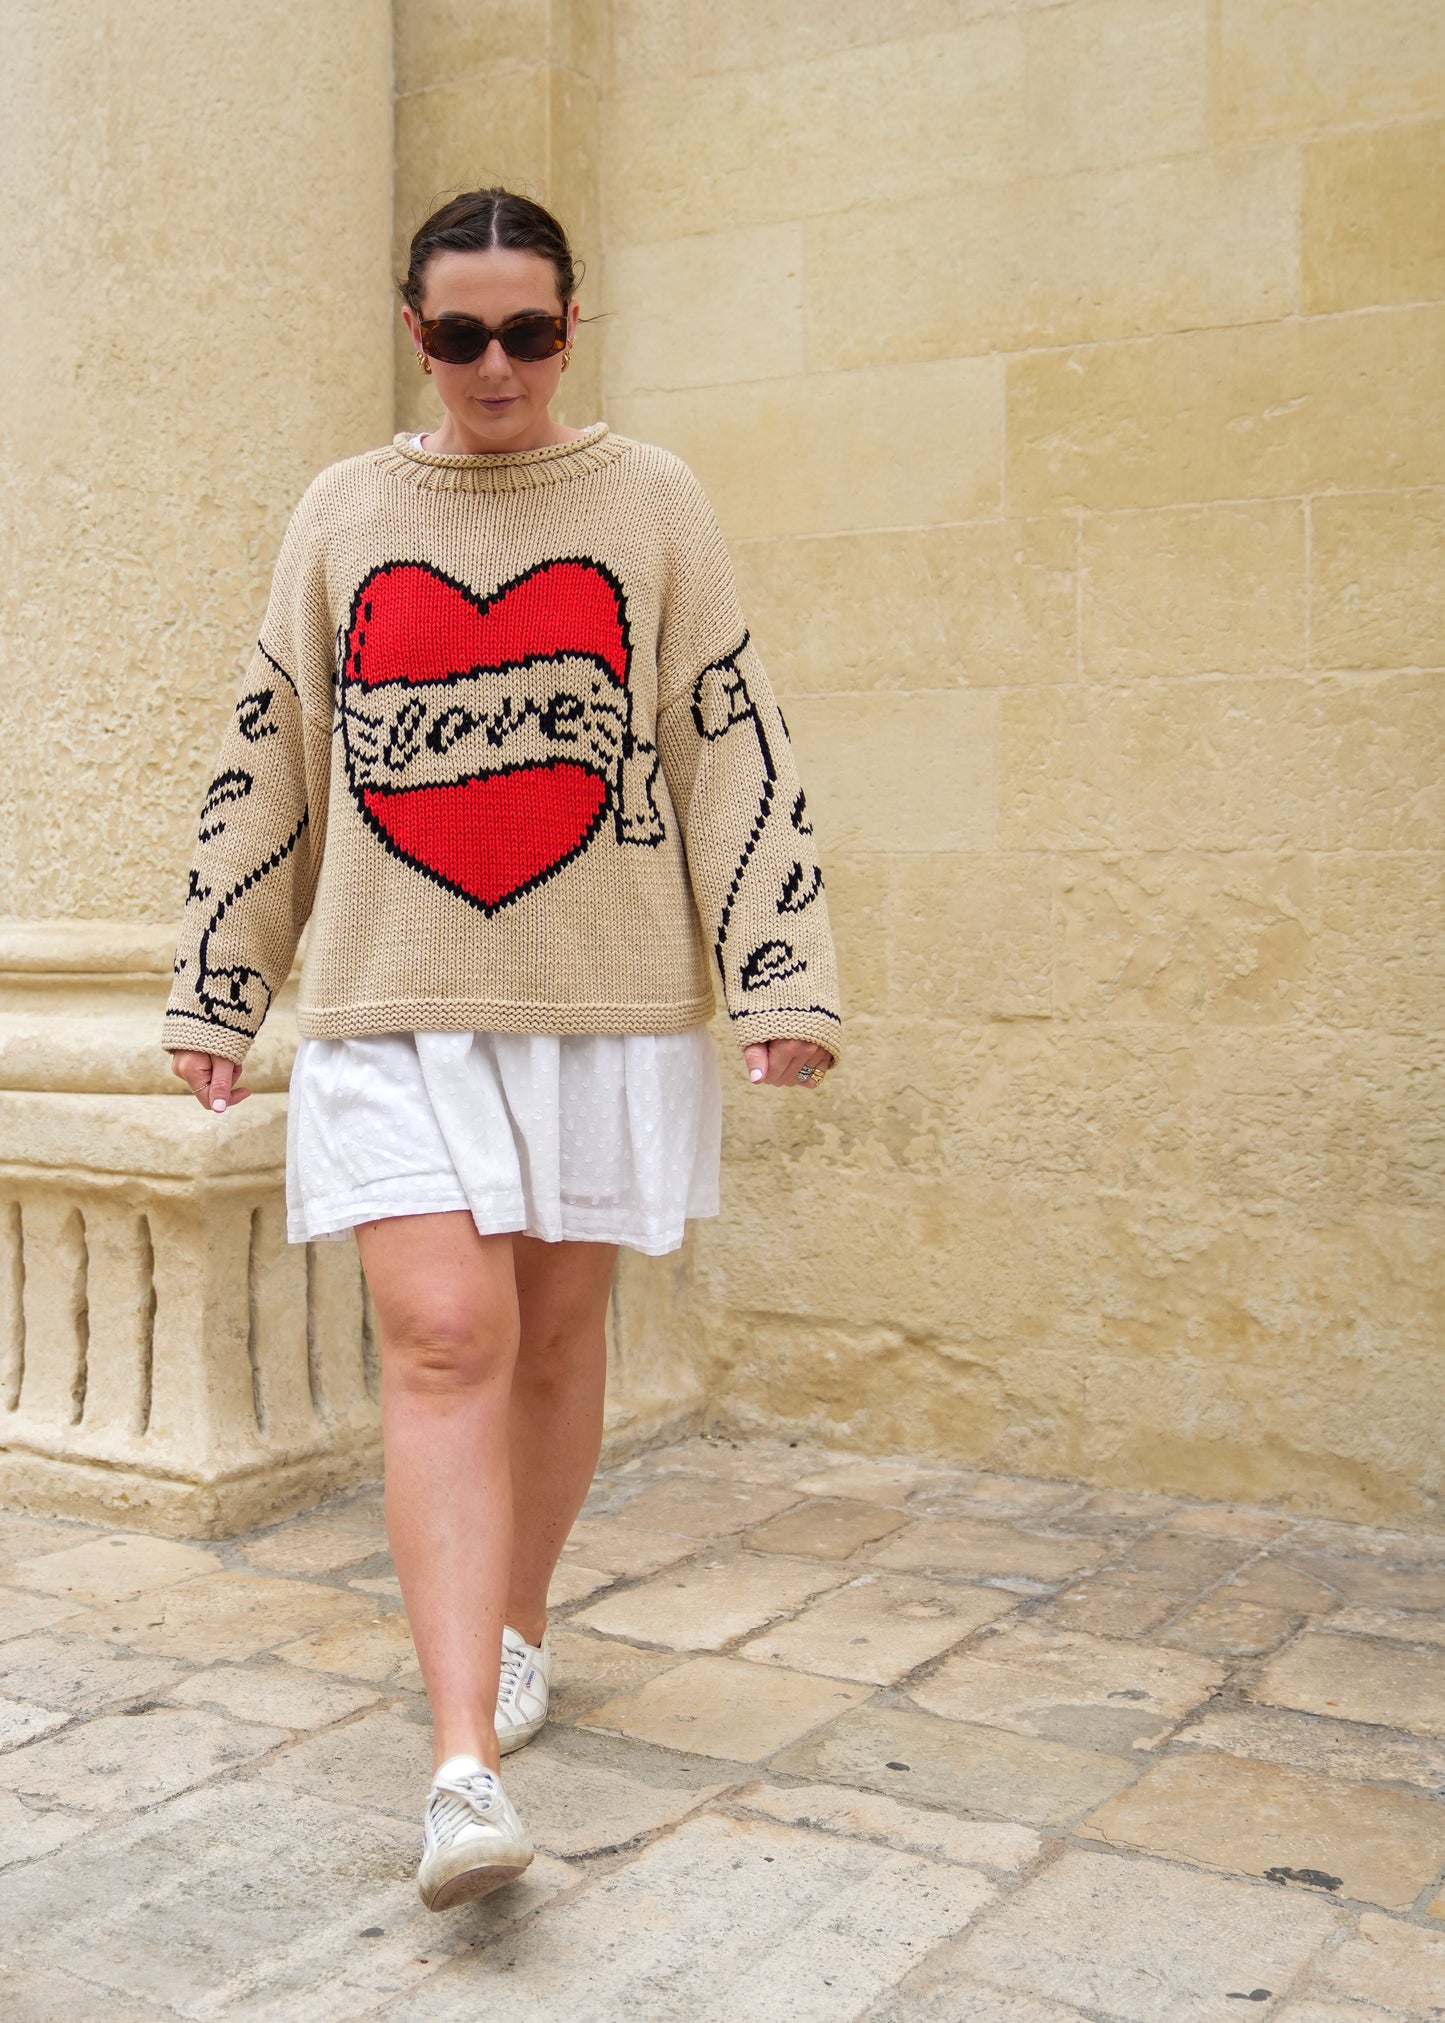 The Young Hearts Jumper